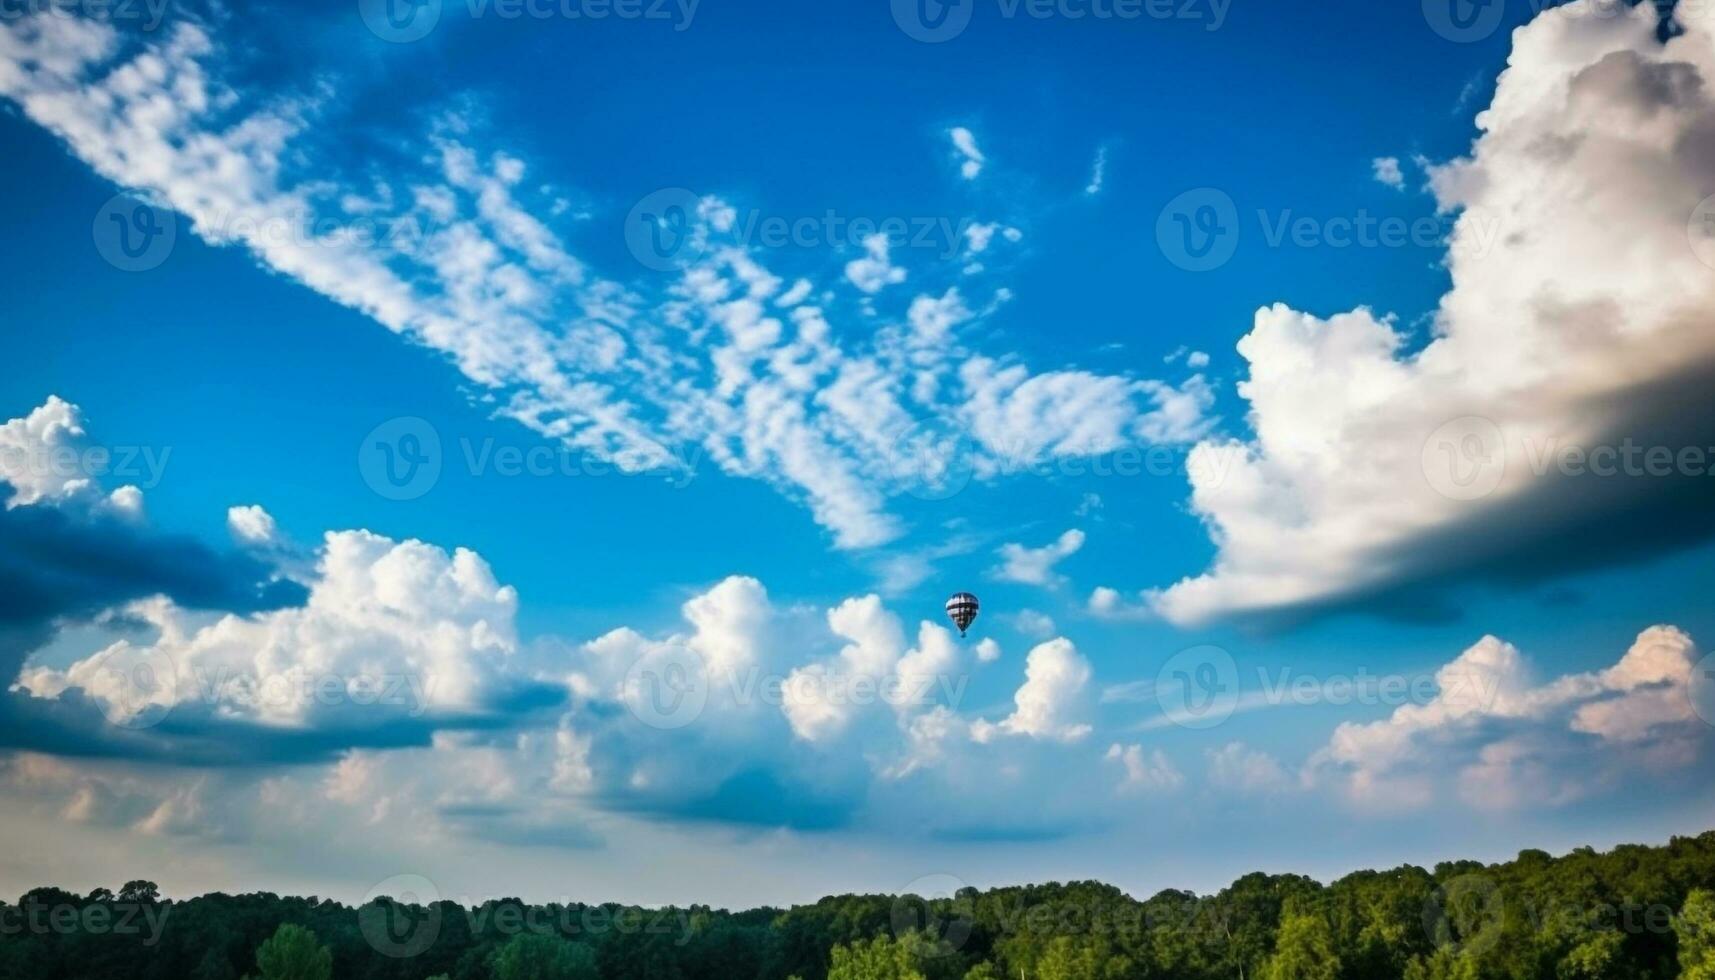 Flying high in the sky, experiencing the ultimate freedom generated by AI photo